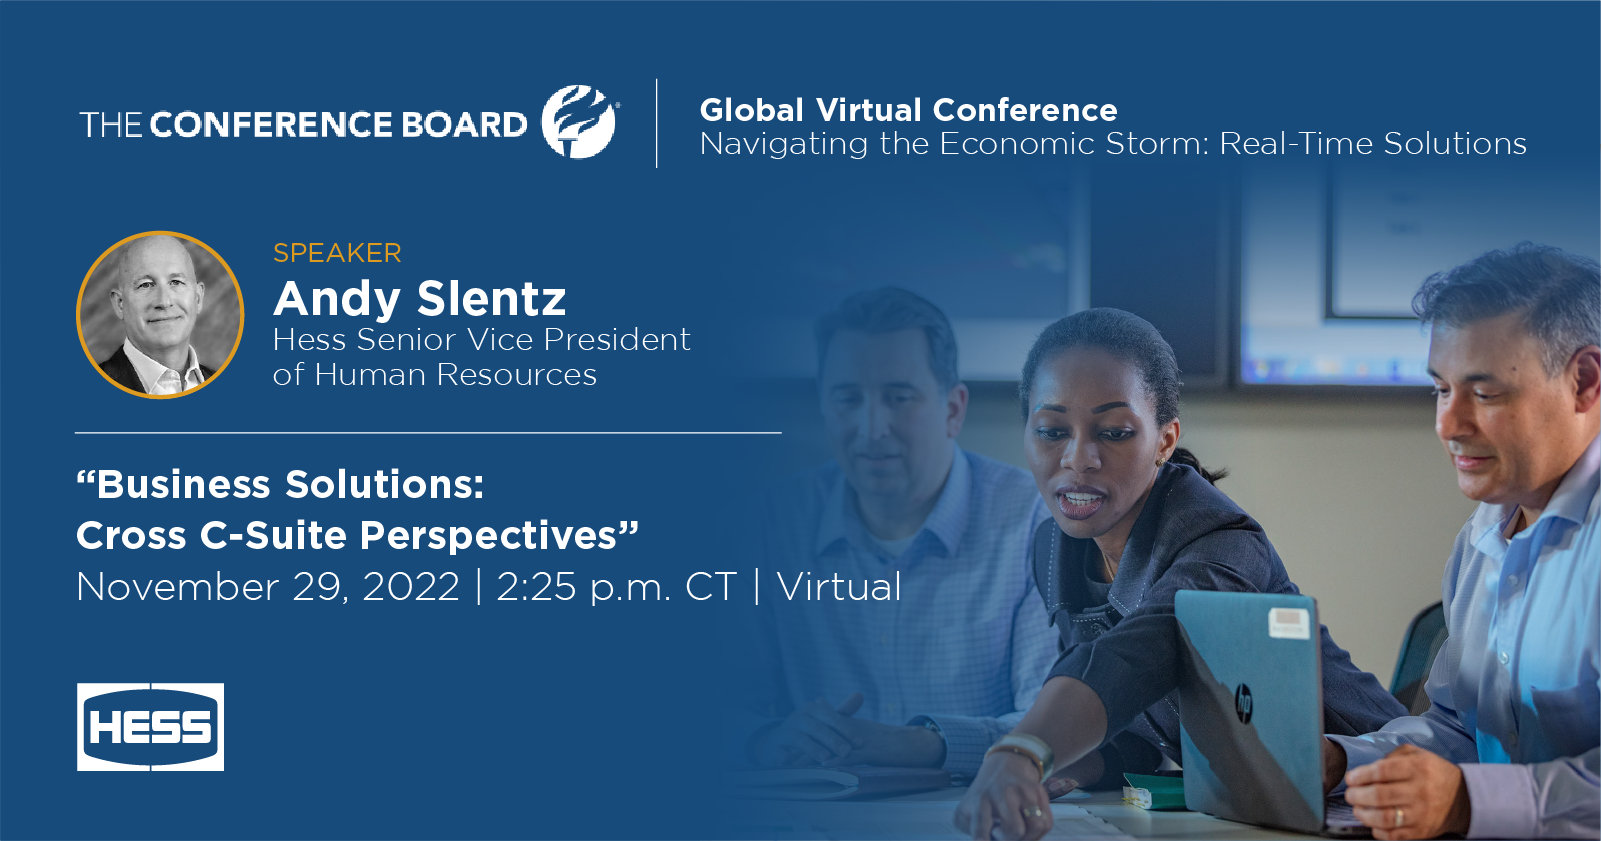 Andy Slentz to Speak at The Conference Board Global Virtual Conference